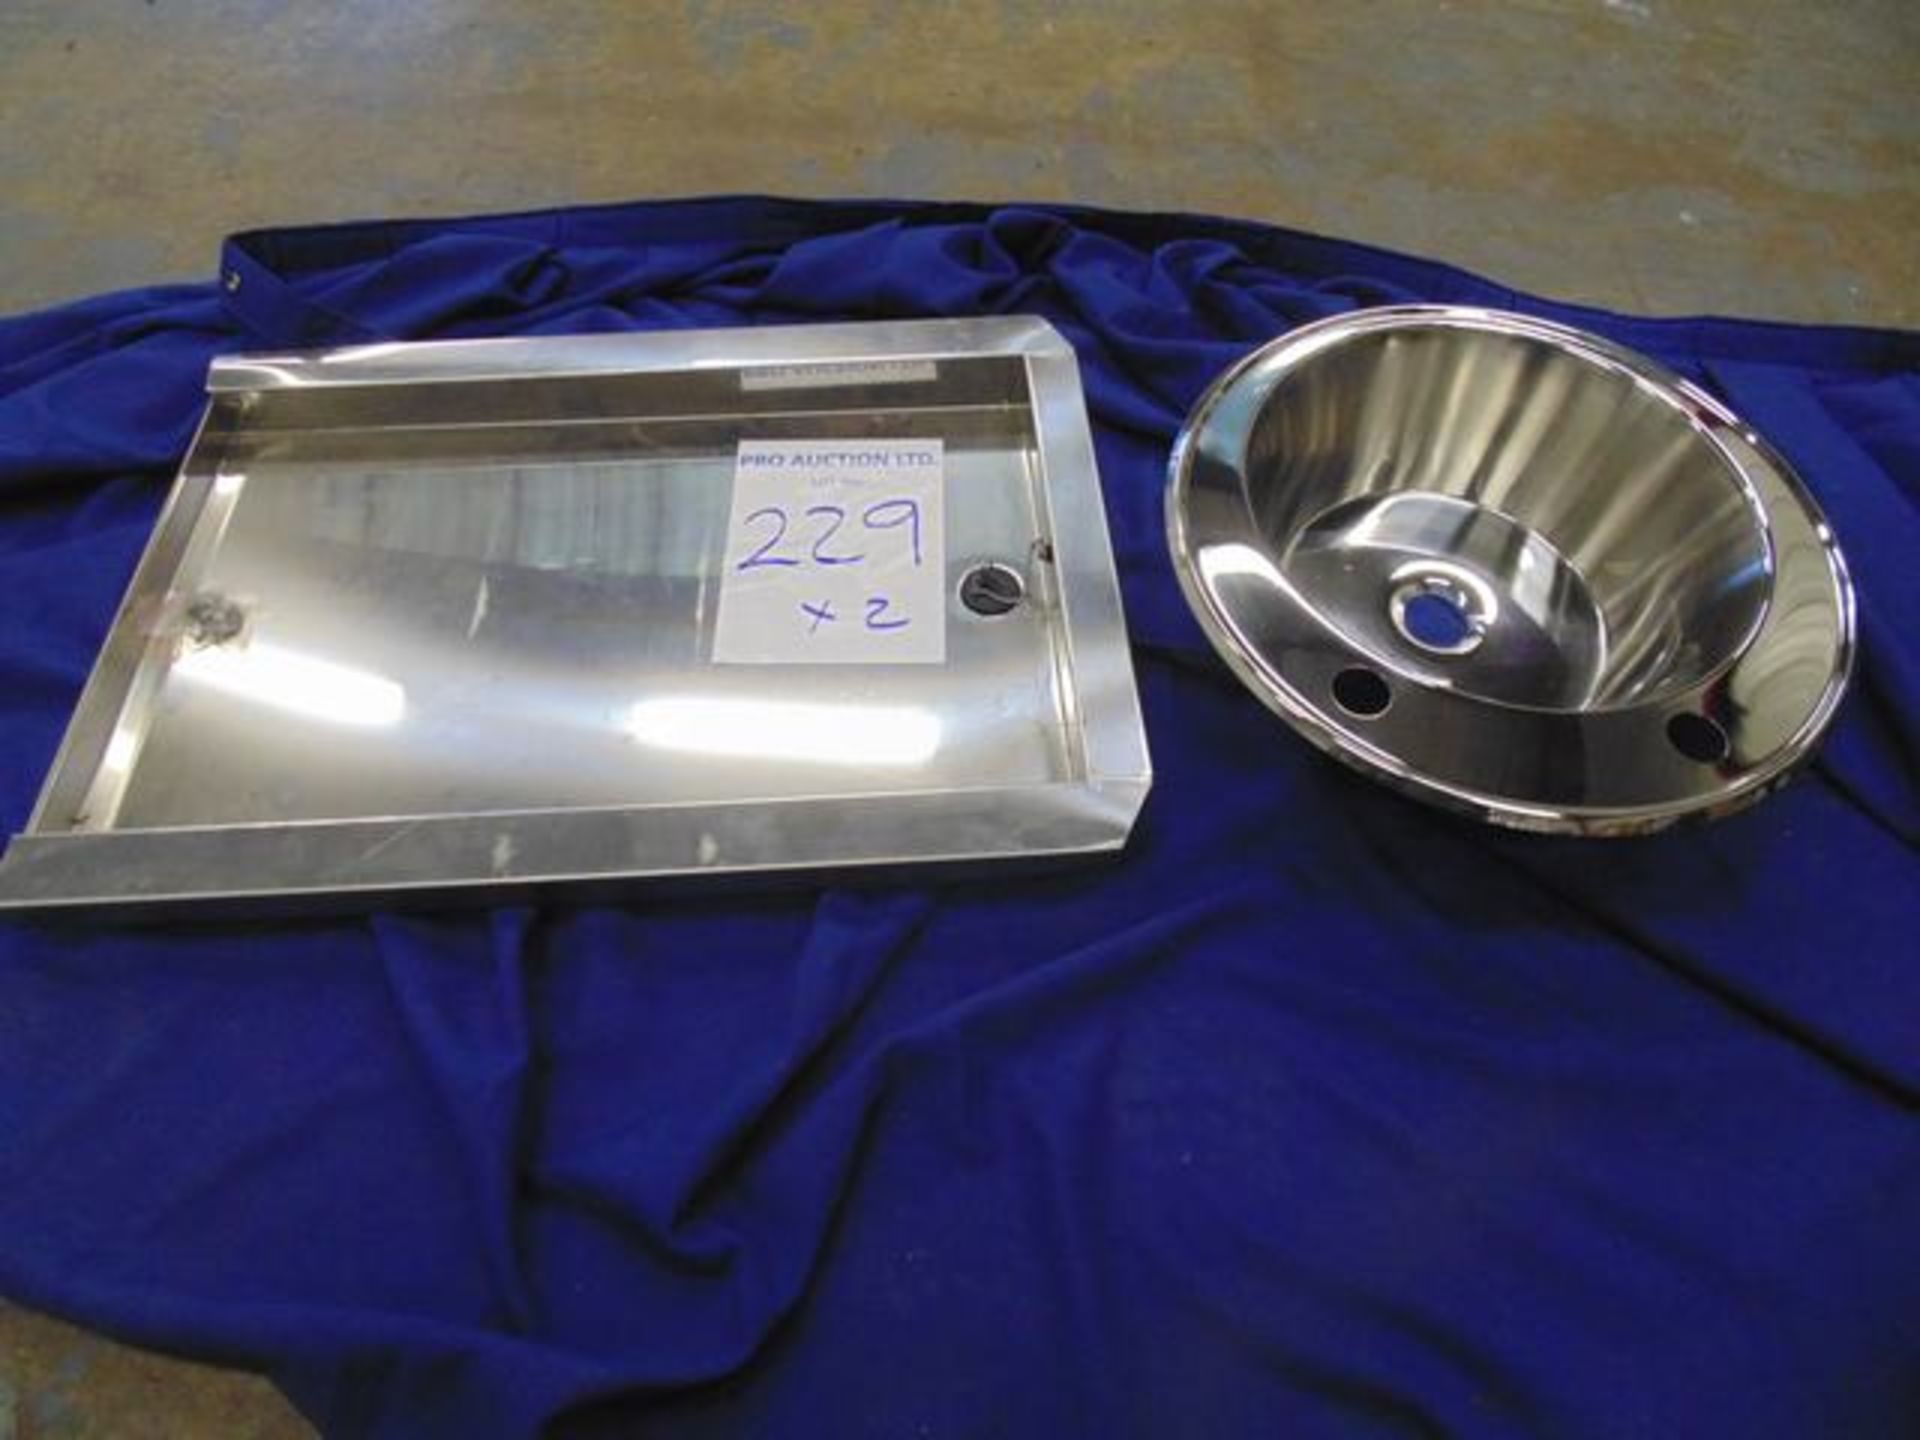 Stainless Steel hand sink and drainer